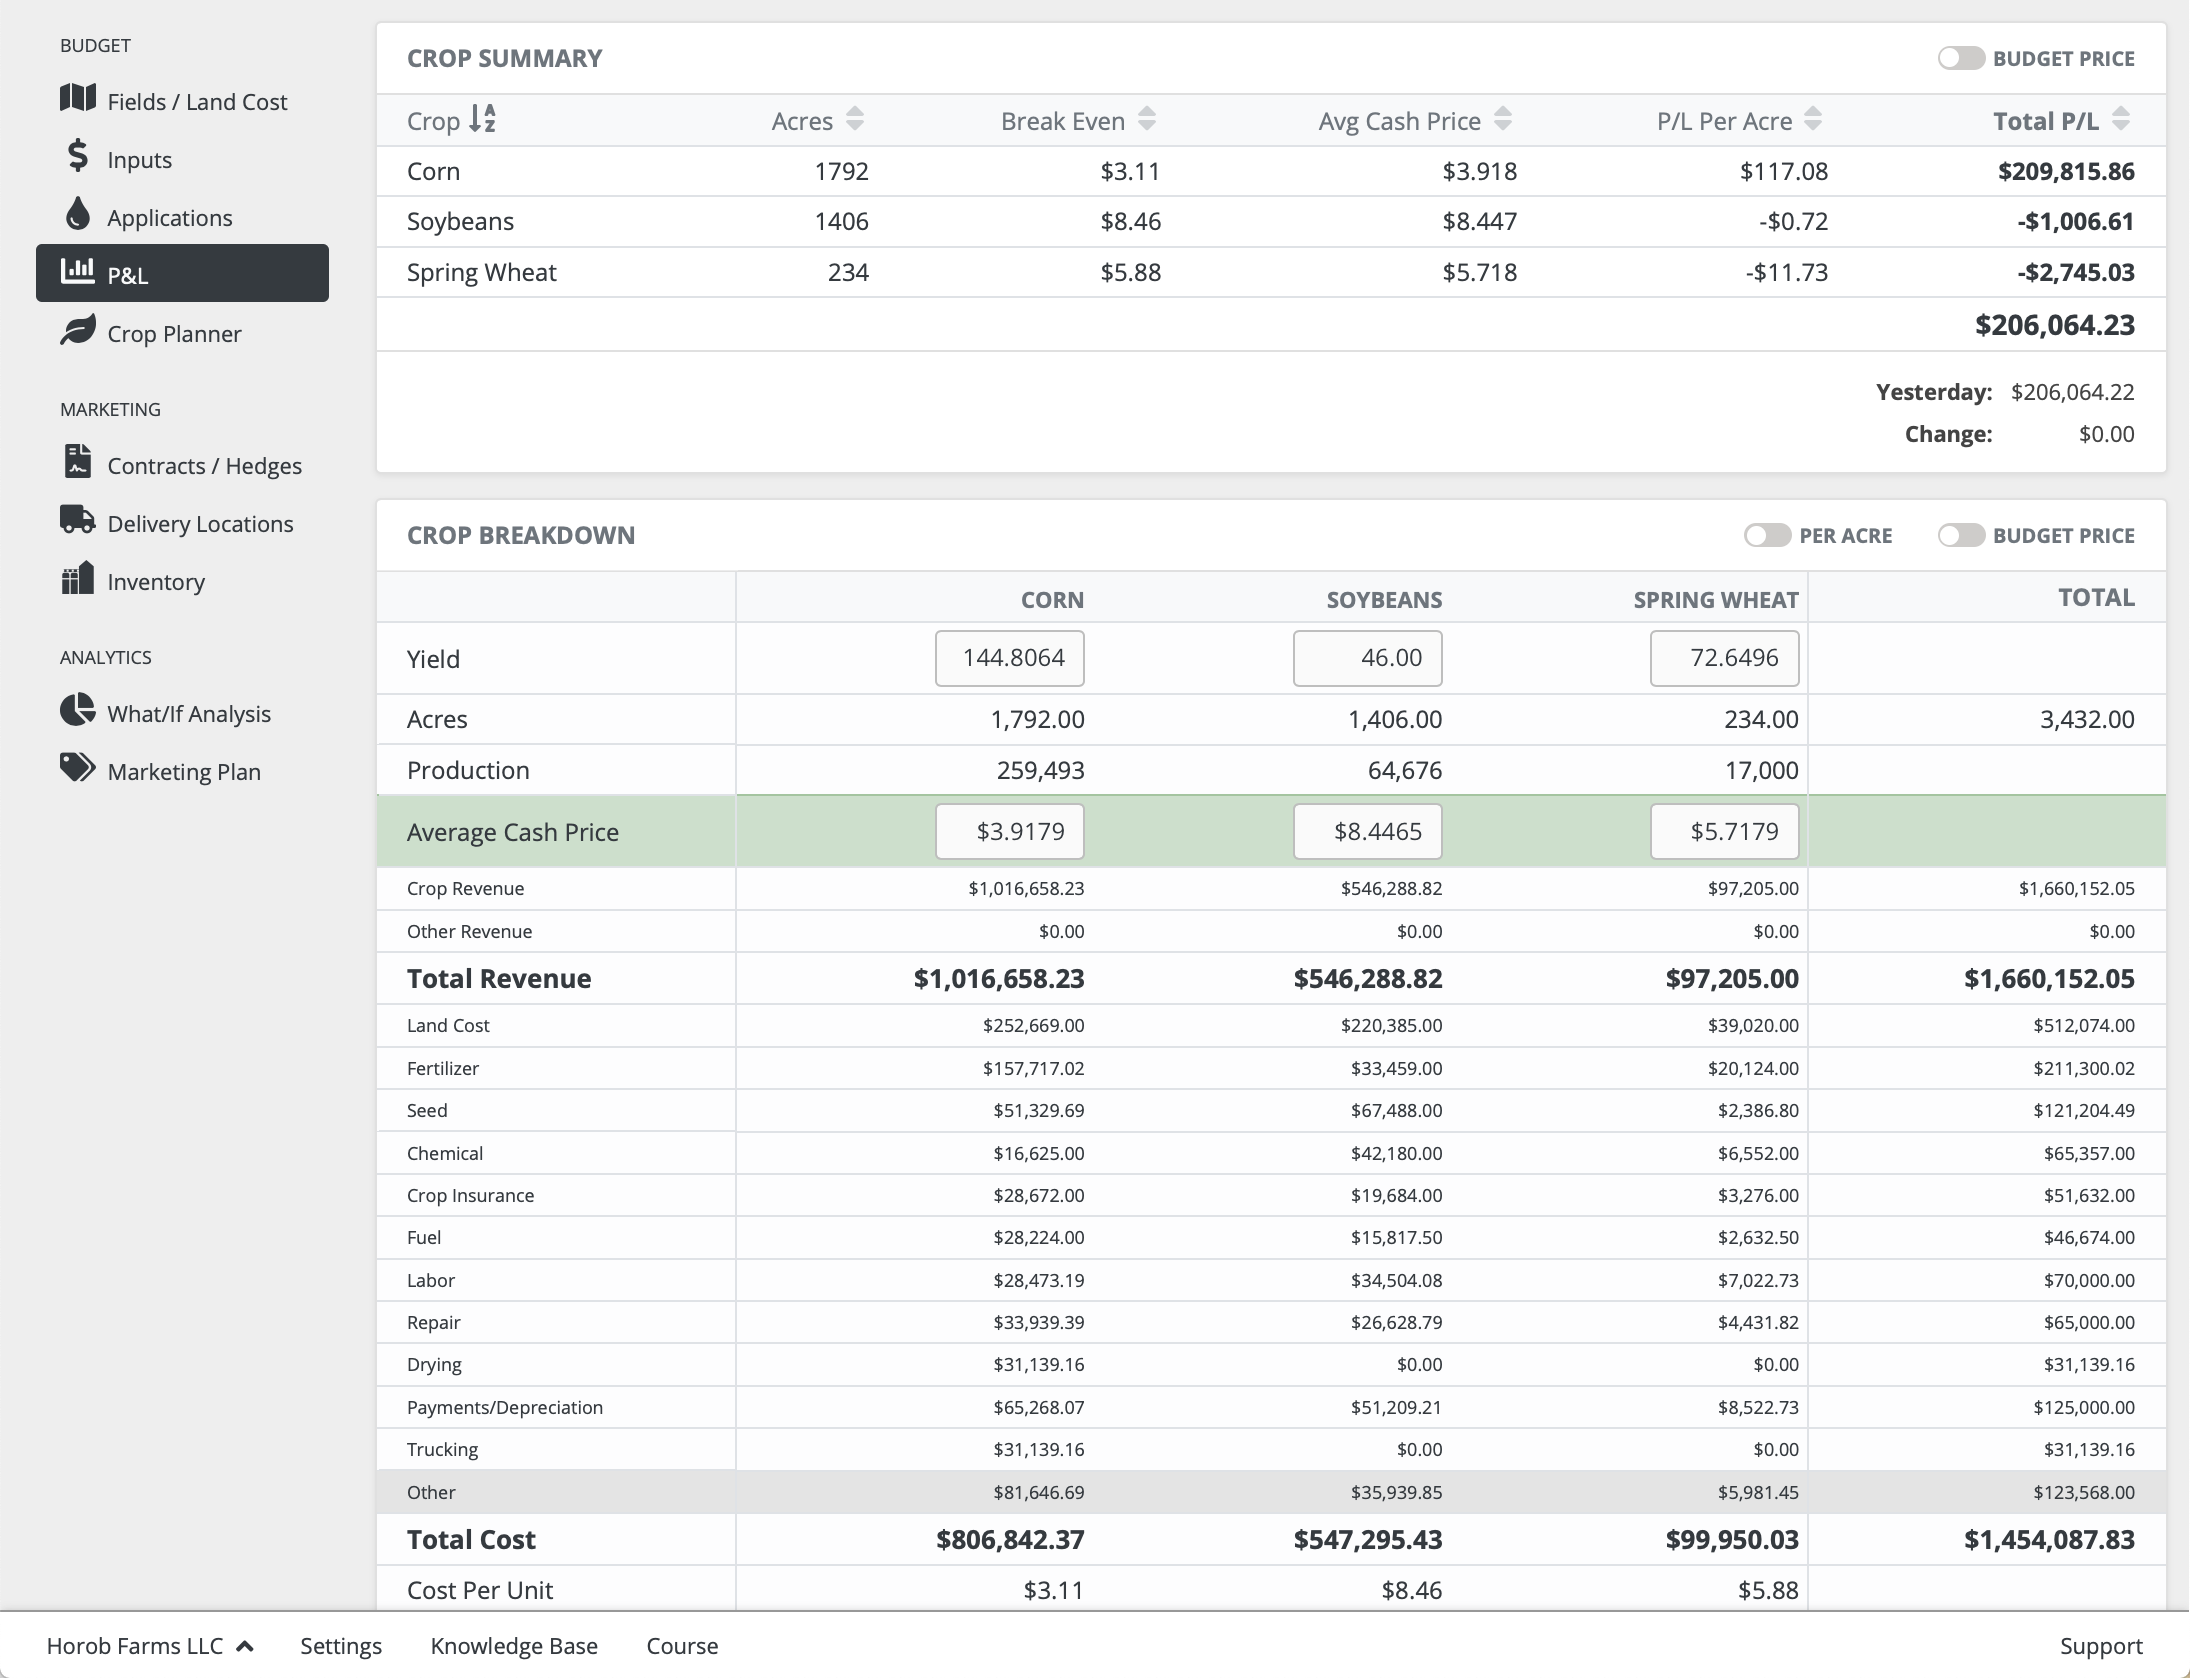 Track your Cost of Production and Profitability Year-Round